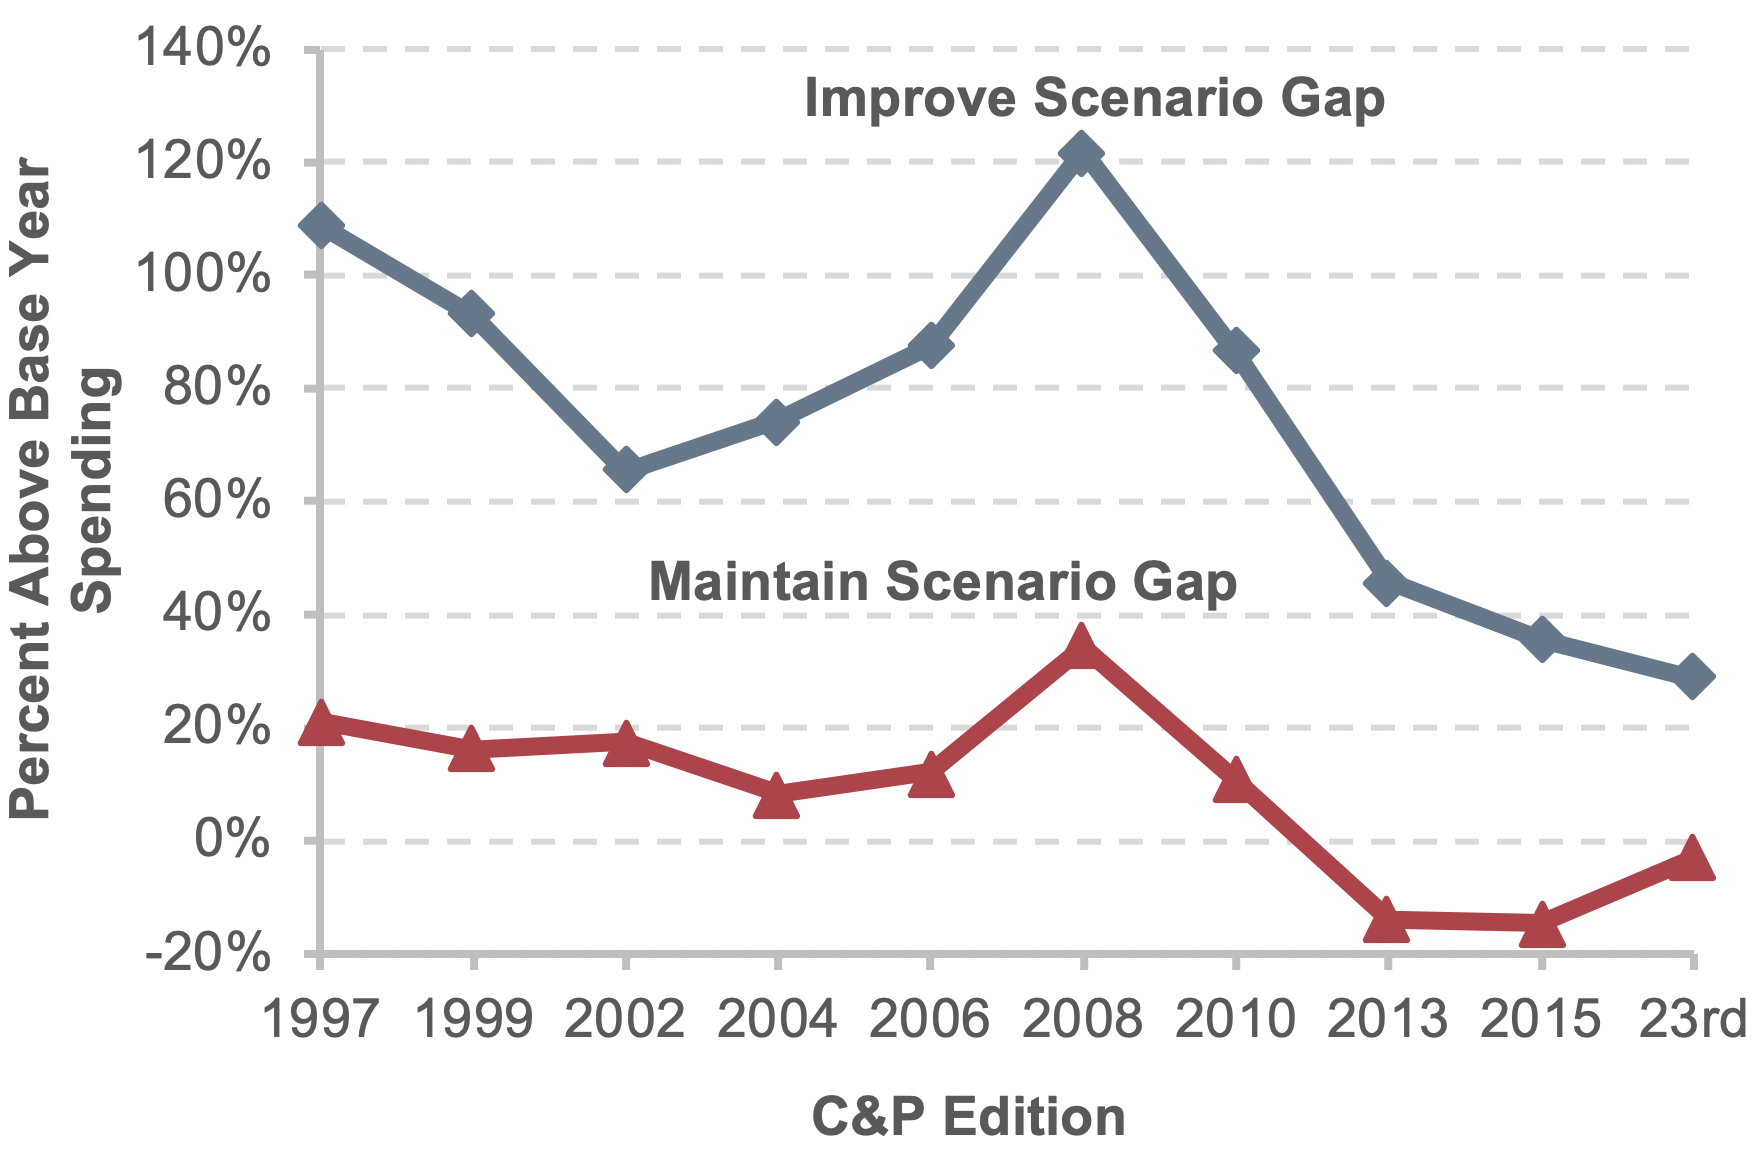 A line plot shows the comparison of investments under two different scenarios to base-year spending throughout all past C&P Reports from 1997 through 2015, as well as the 23rd C&P Report. For the Maintain scenario, investment as compared to the base year begins at 21.0% in the 1997 C&P report, declines to 8.3% in the 2004 C&P report, rises to 34.2% in the 2008 C&P report, decreases to -14.6% in the 2015 C&P report, then increases to a final value of -2.9% in this 23rd C&P Report. For the Improve scenario, investment as compared to the base year begins at 108.9% in the 1997 C&P report, declines to 65.3% in the 2002 C&P report, increases to 121.9% in the 2008 C&P report, then decreases to 28.8% in the 23rd C&P Report. Sources: HERS and NBIAS.